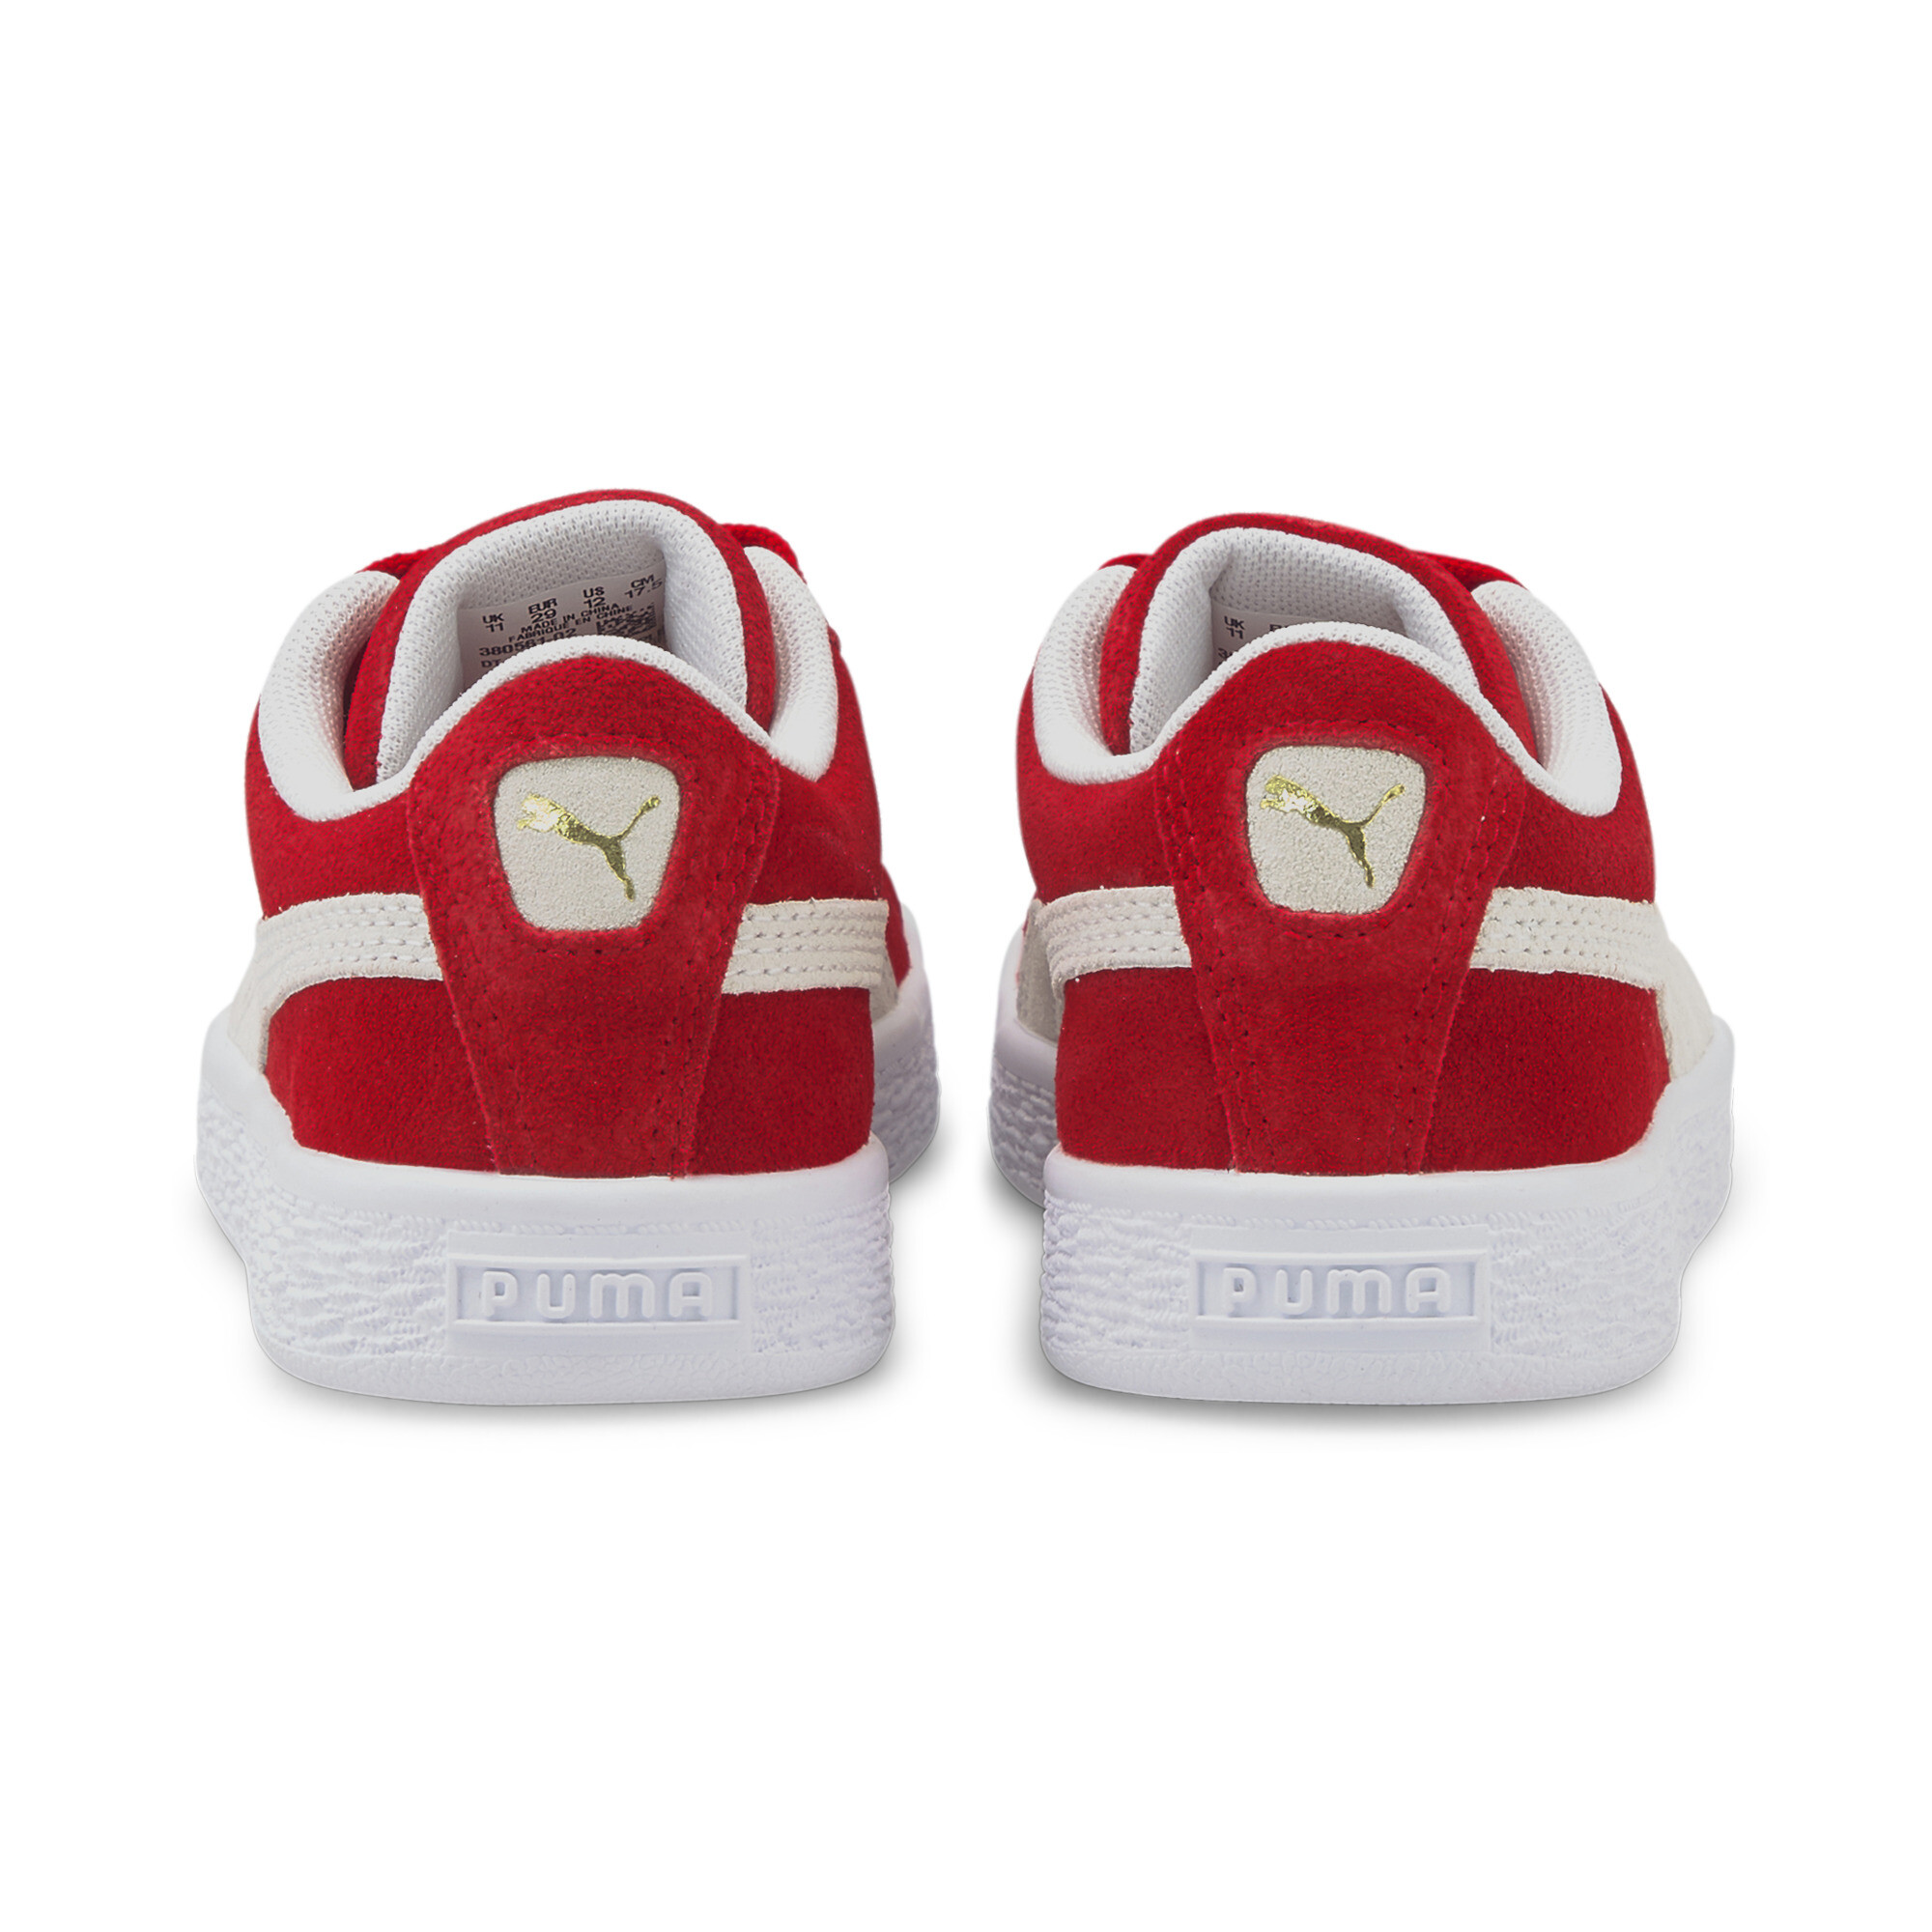 Puma Suede Classic XXI Kids' Trainers, Red, Size 35, Shoes